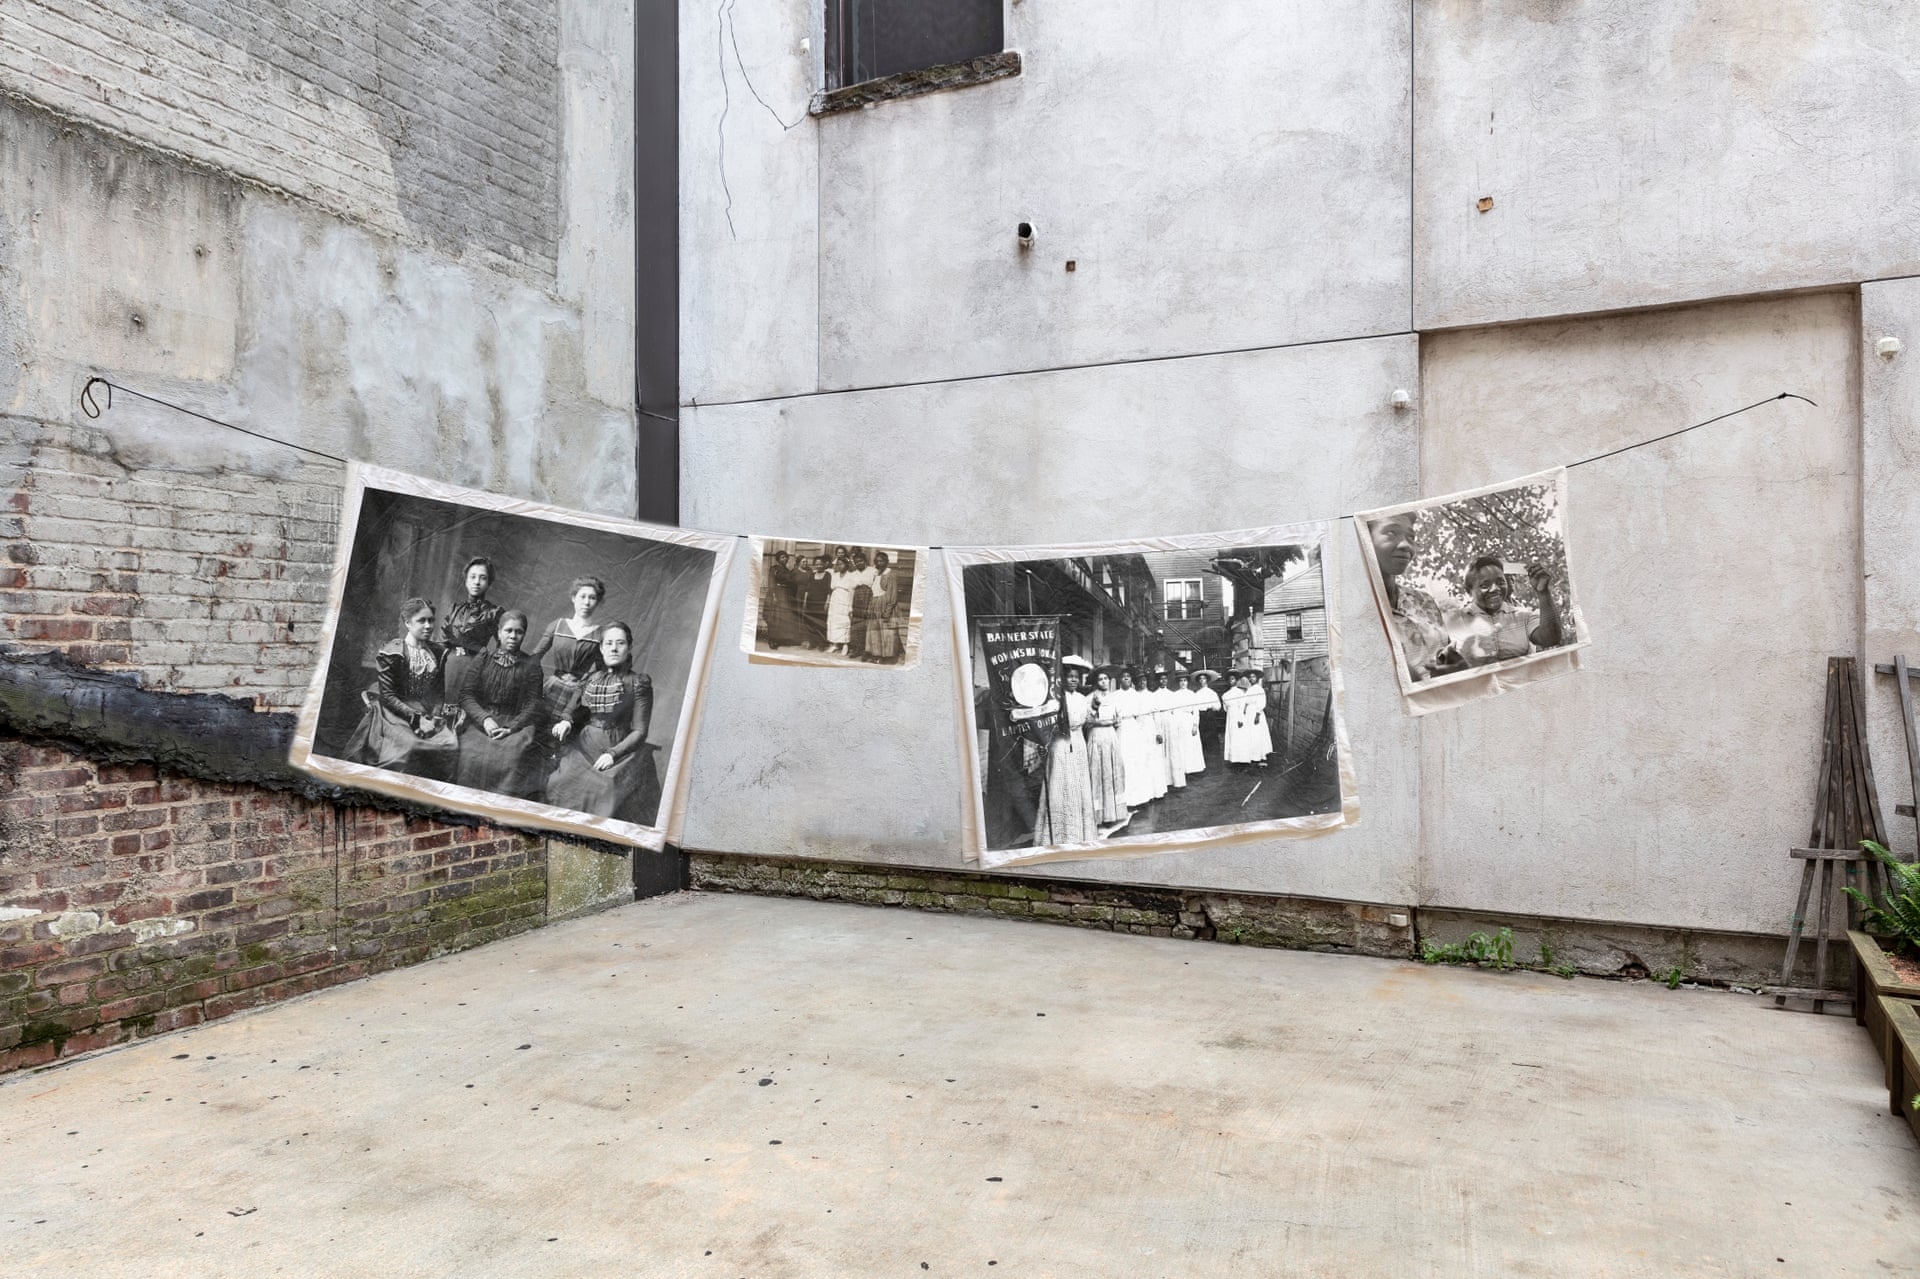 Images of suffragettes hang in a clothesline in a back alley